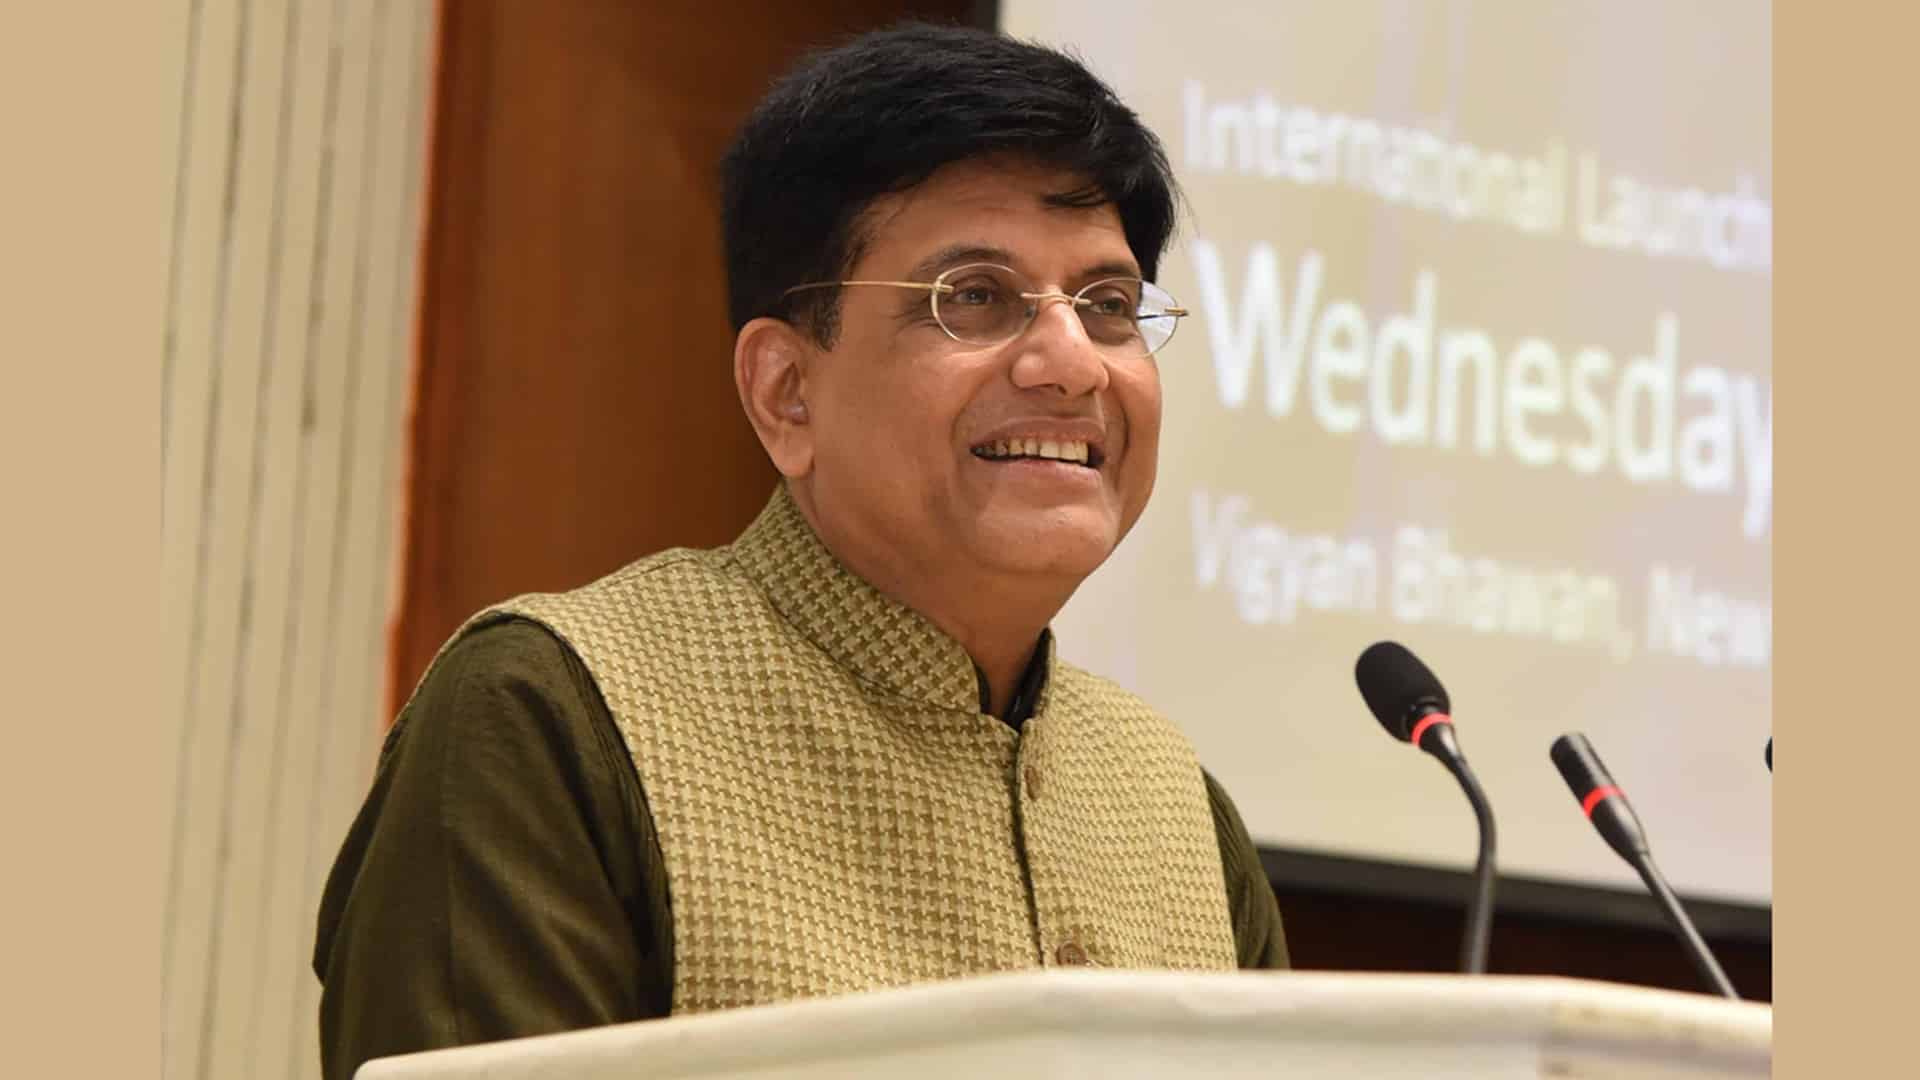 India's aim is to become world's largest startup destination: Piyush Goyal